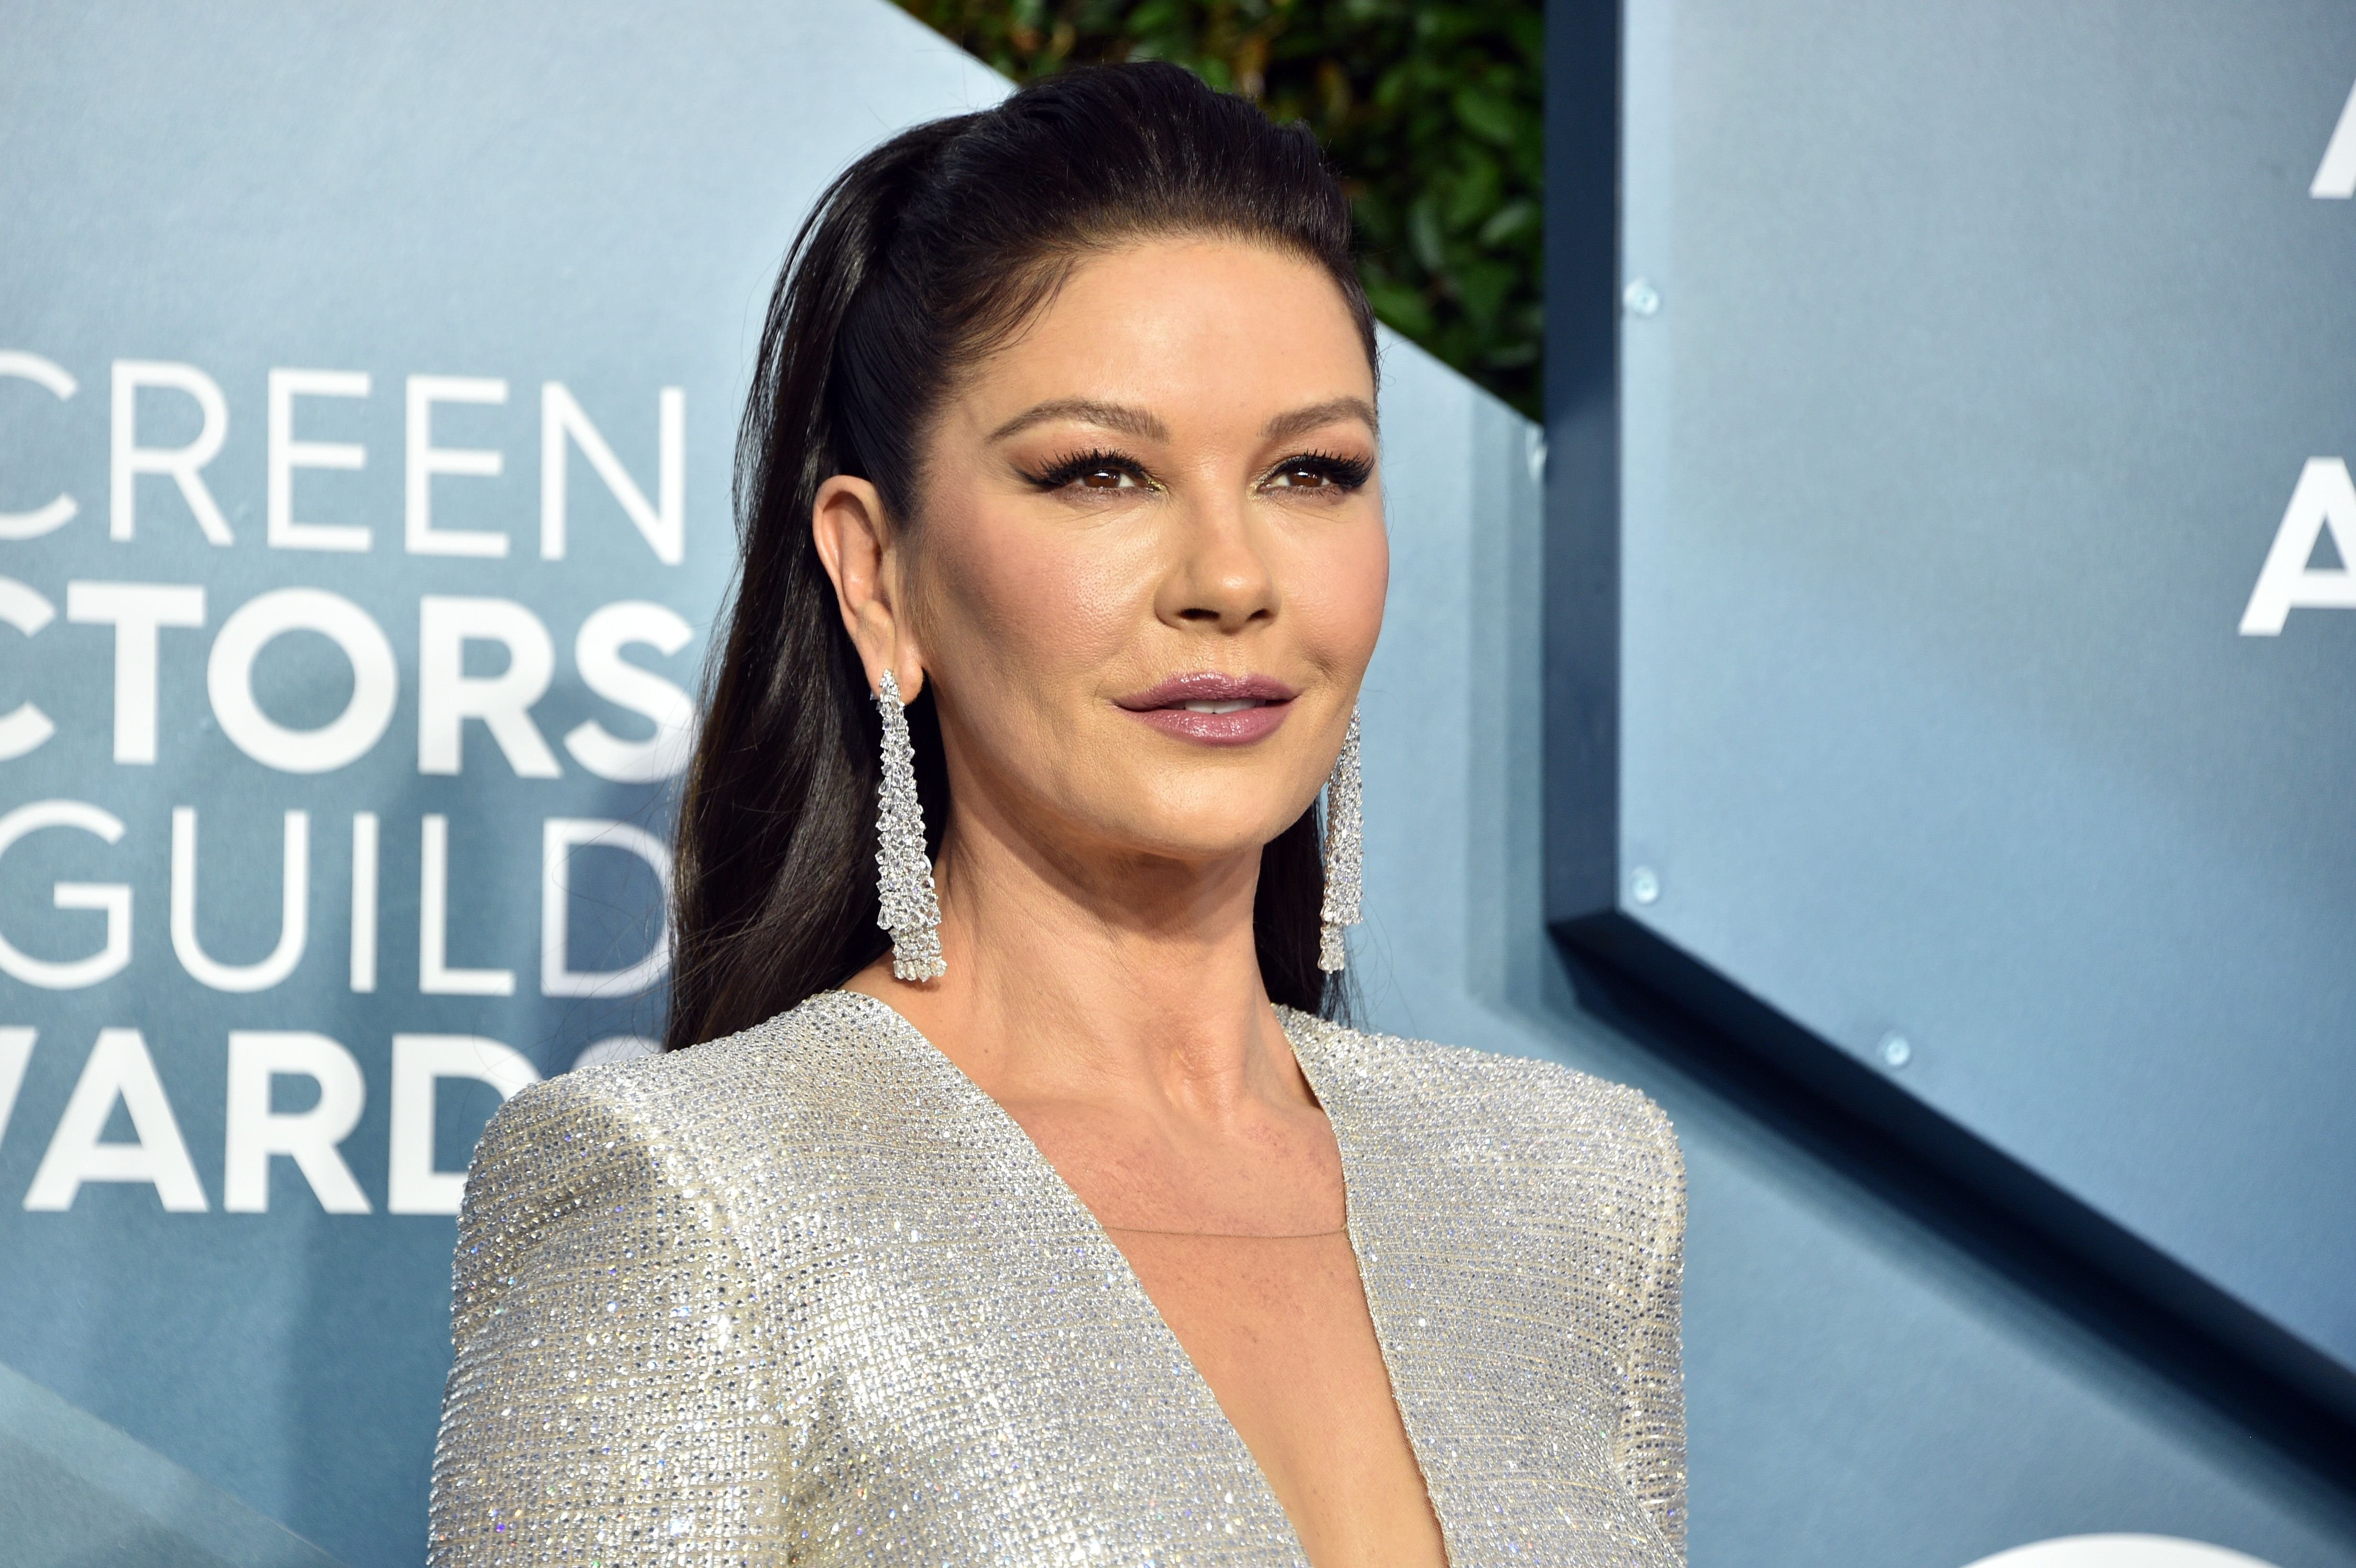 Catherine Zeta-Jones at the 26th Annual Screen Actors Guild Awards at The Shrine Auditorium on January 19, 2020. | Photo: Getty Images